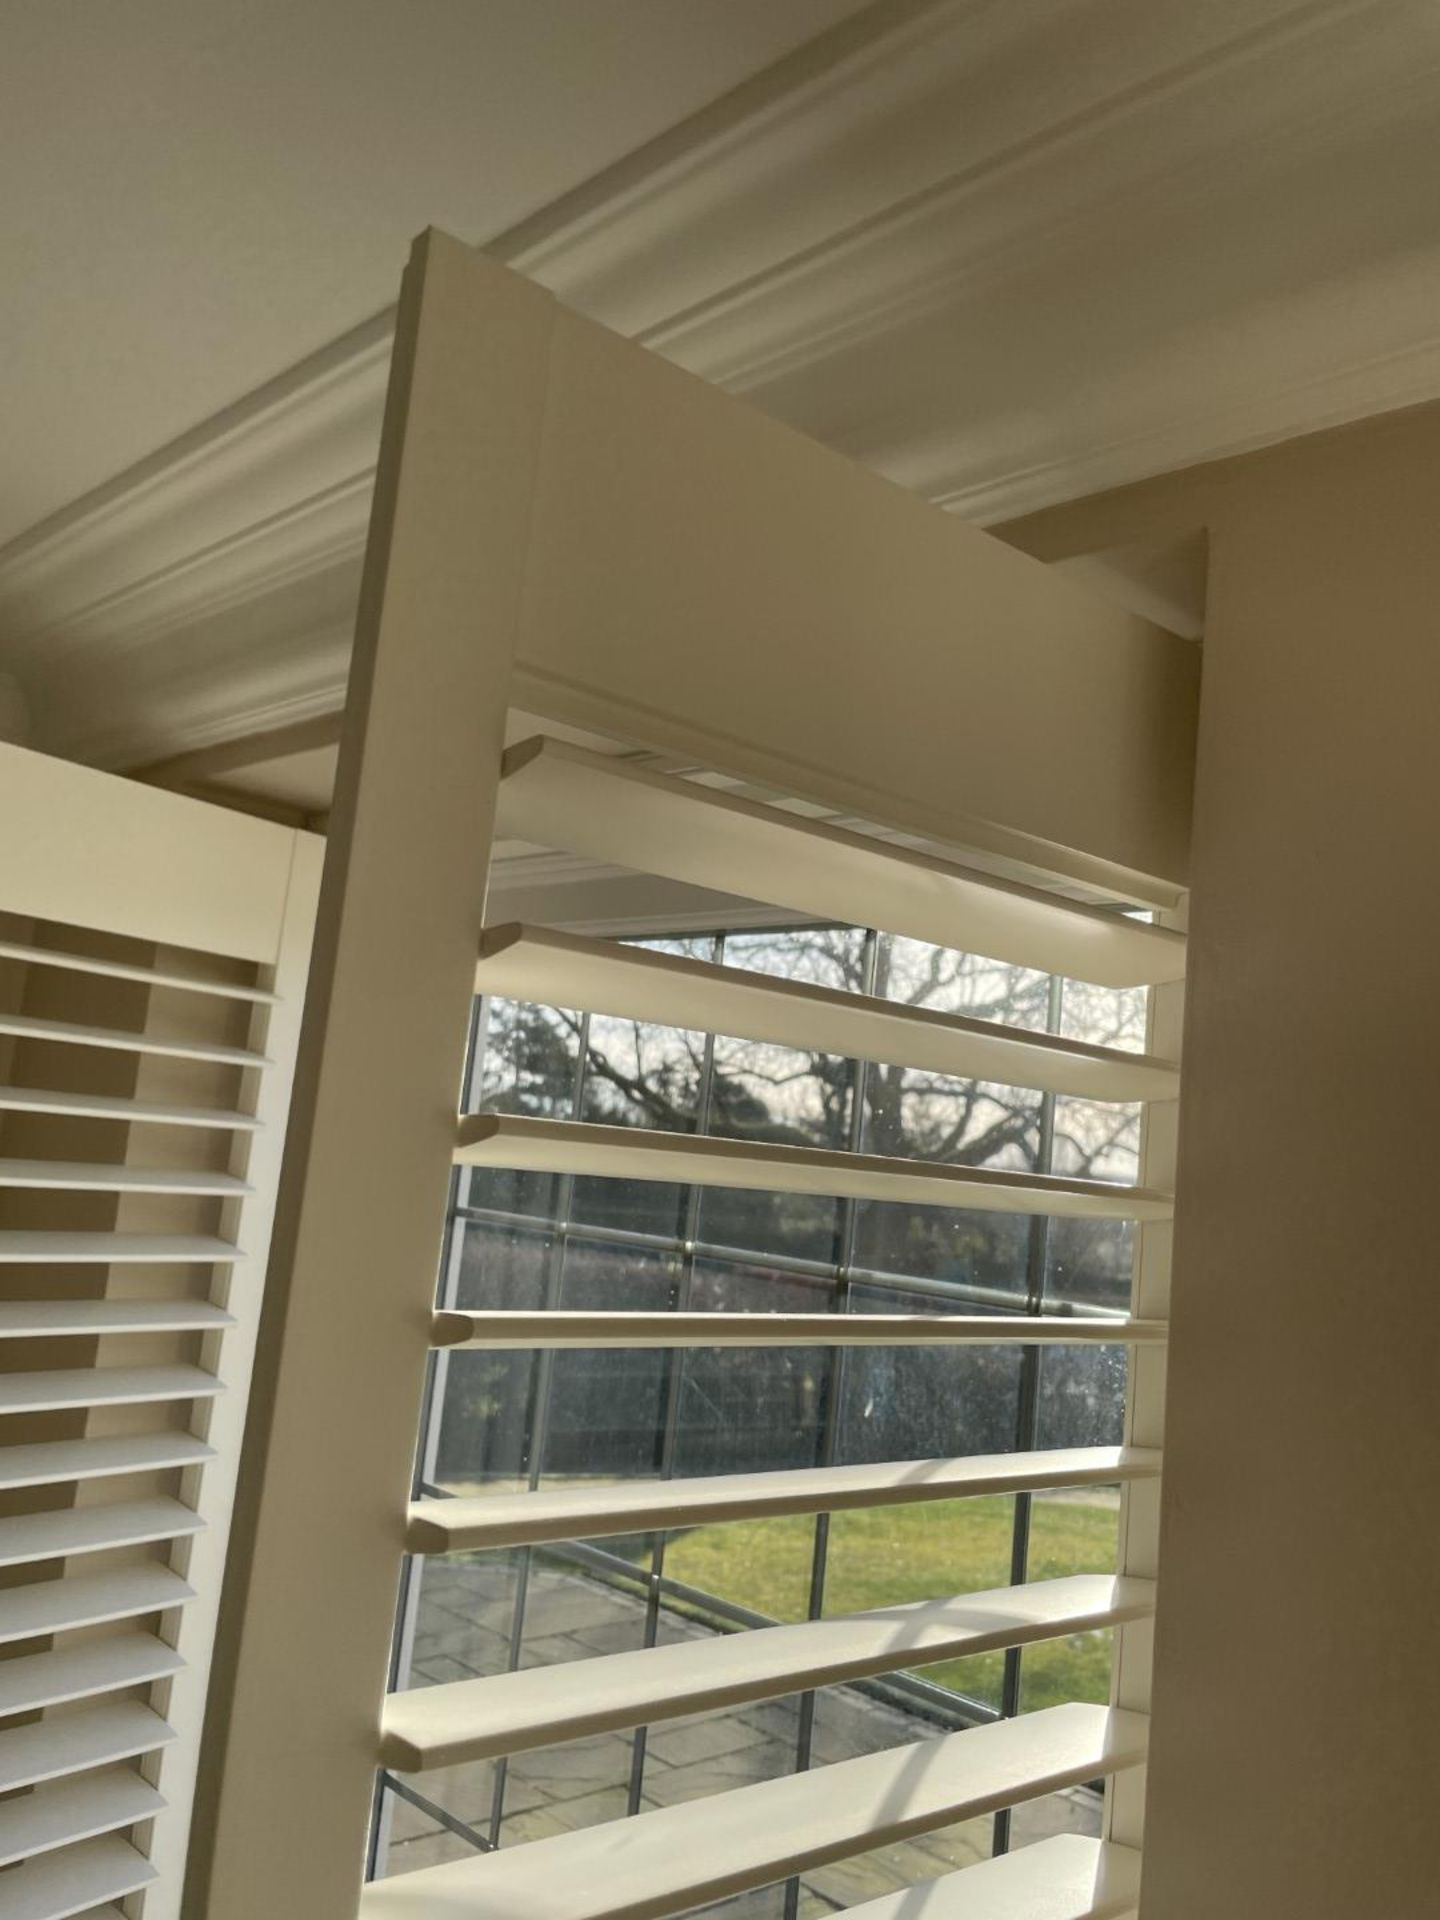 1 x Hardwood Timber Double Glazed Window Frames fitted with Shutter Blinds, In White - Ref: PAN107 - Image 7 of 15